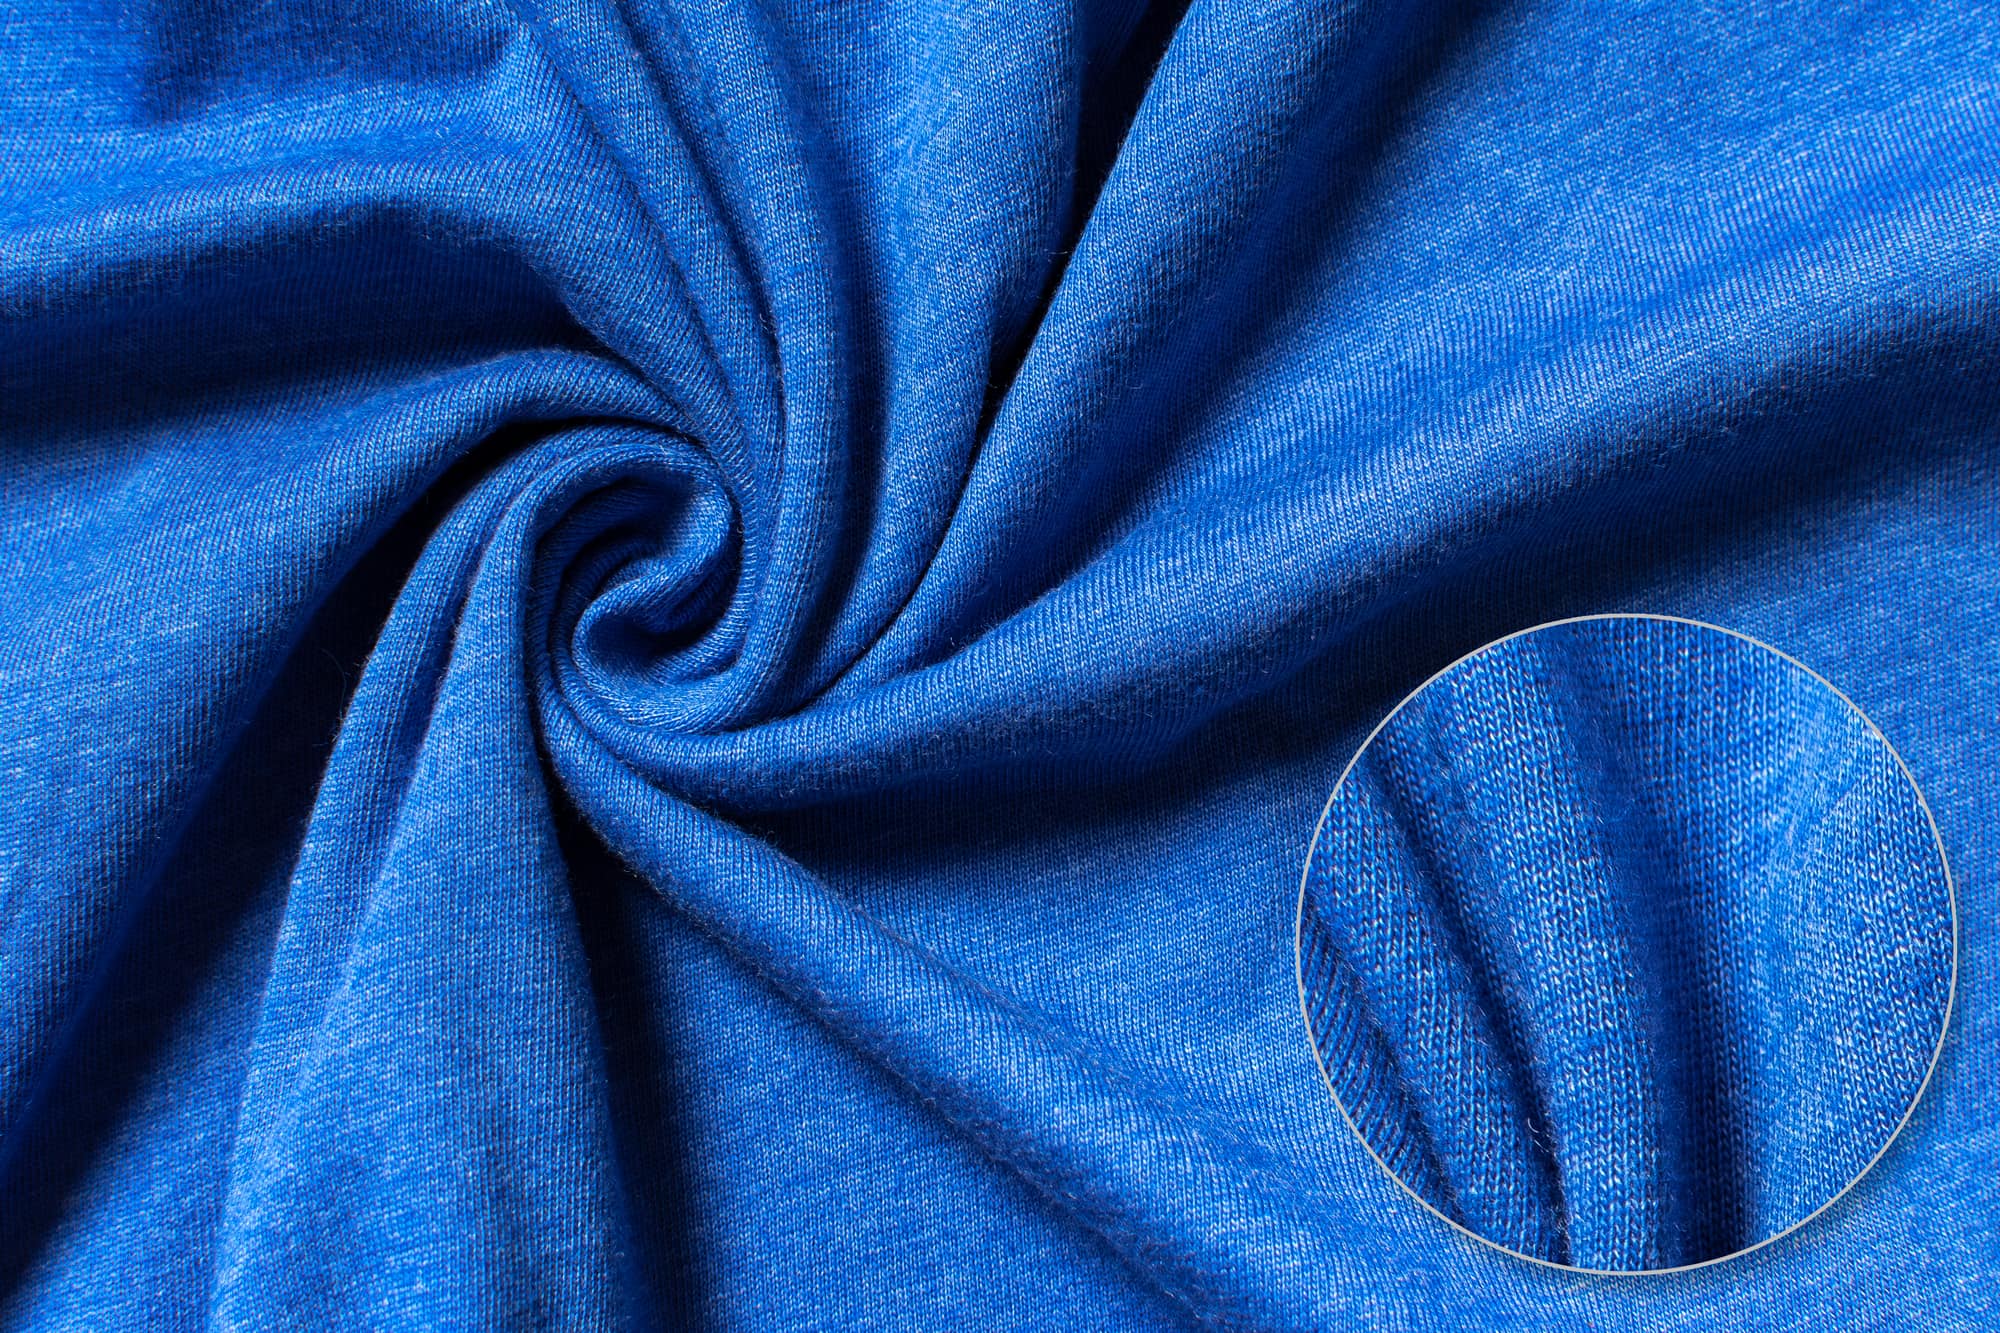 Fabric detail of the Bella Canvas Jersey T-Shirt.